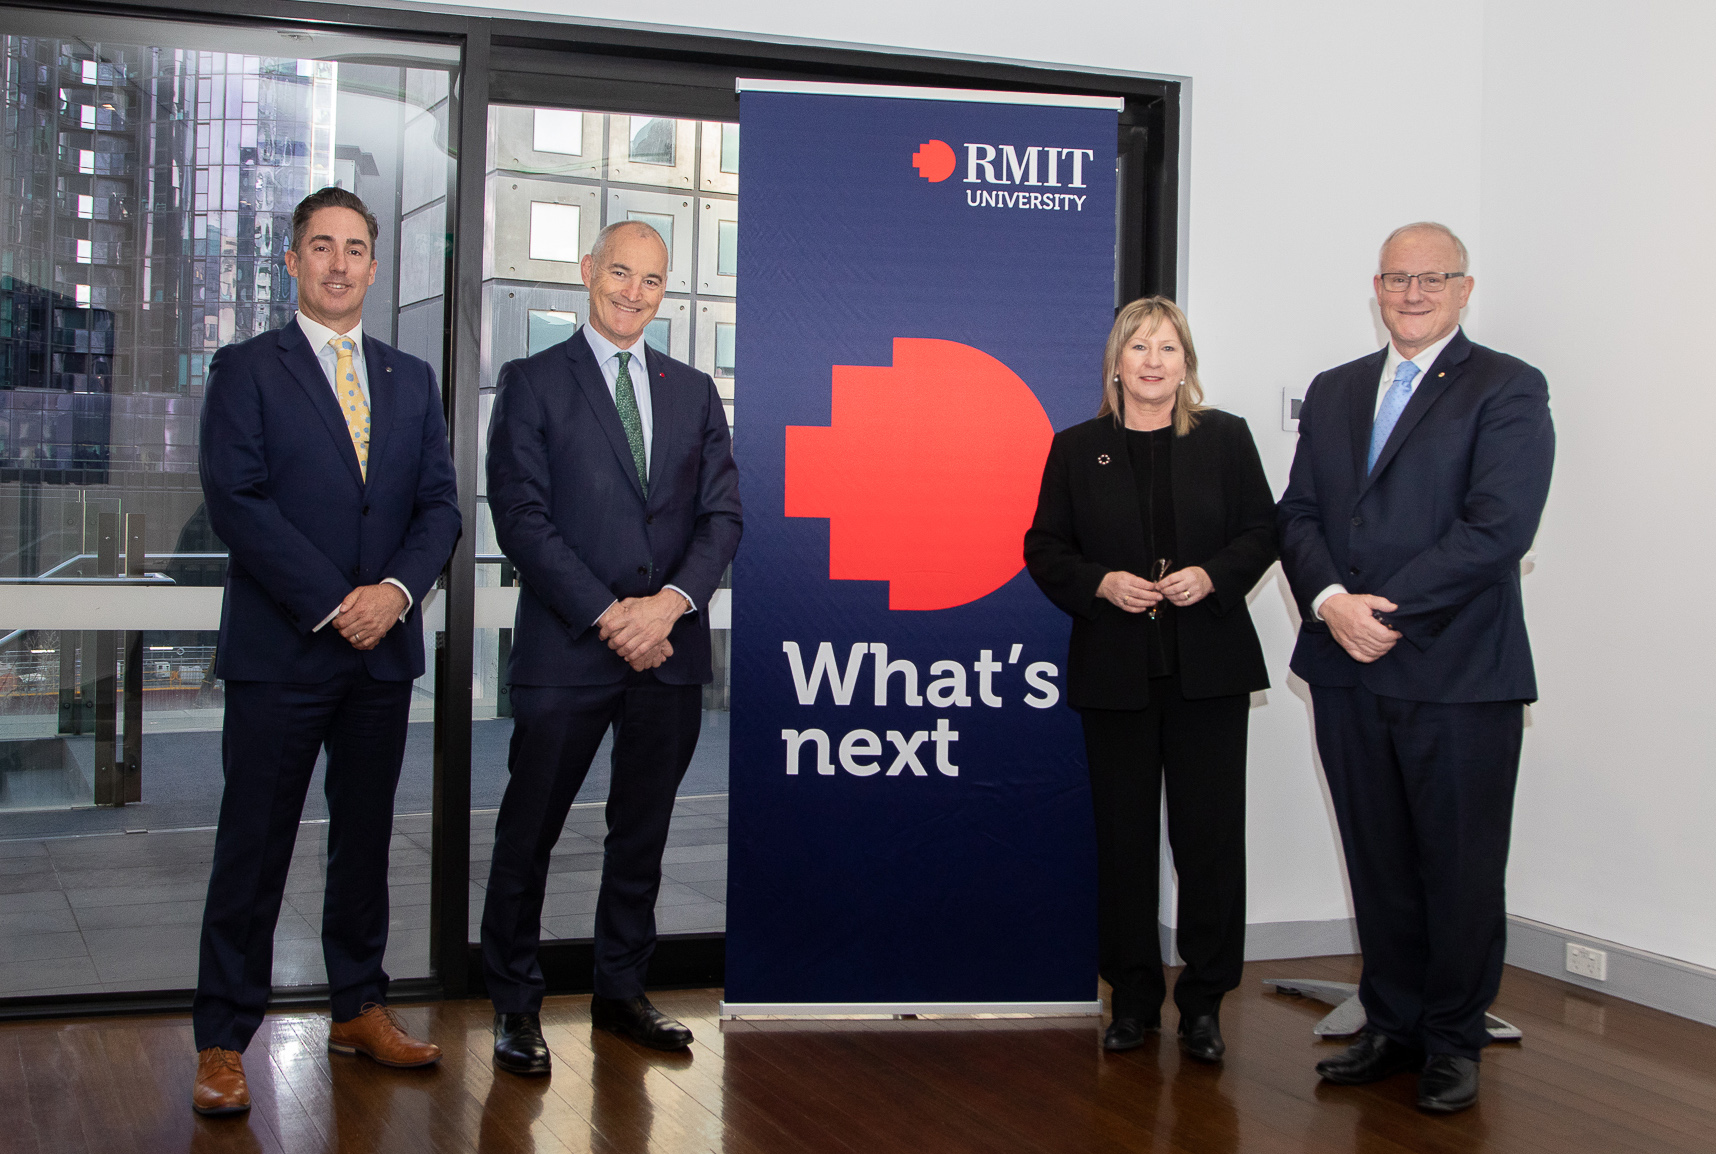 Sleeptite CEO Cameron van den Dungen, Vice-Chancellor and President of RMIT Professor Alec Cameron, Minister for Higher Education Gayle Tierney, Deputy Vice-Chancellor Research and Innovation and Vice-President Professor Calum Drummond.